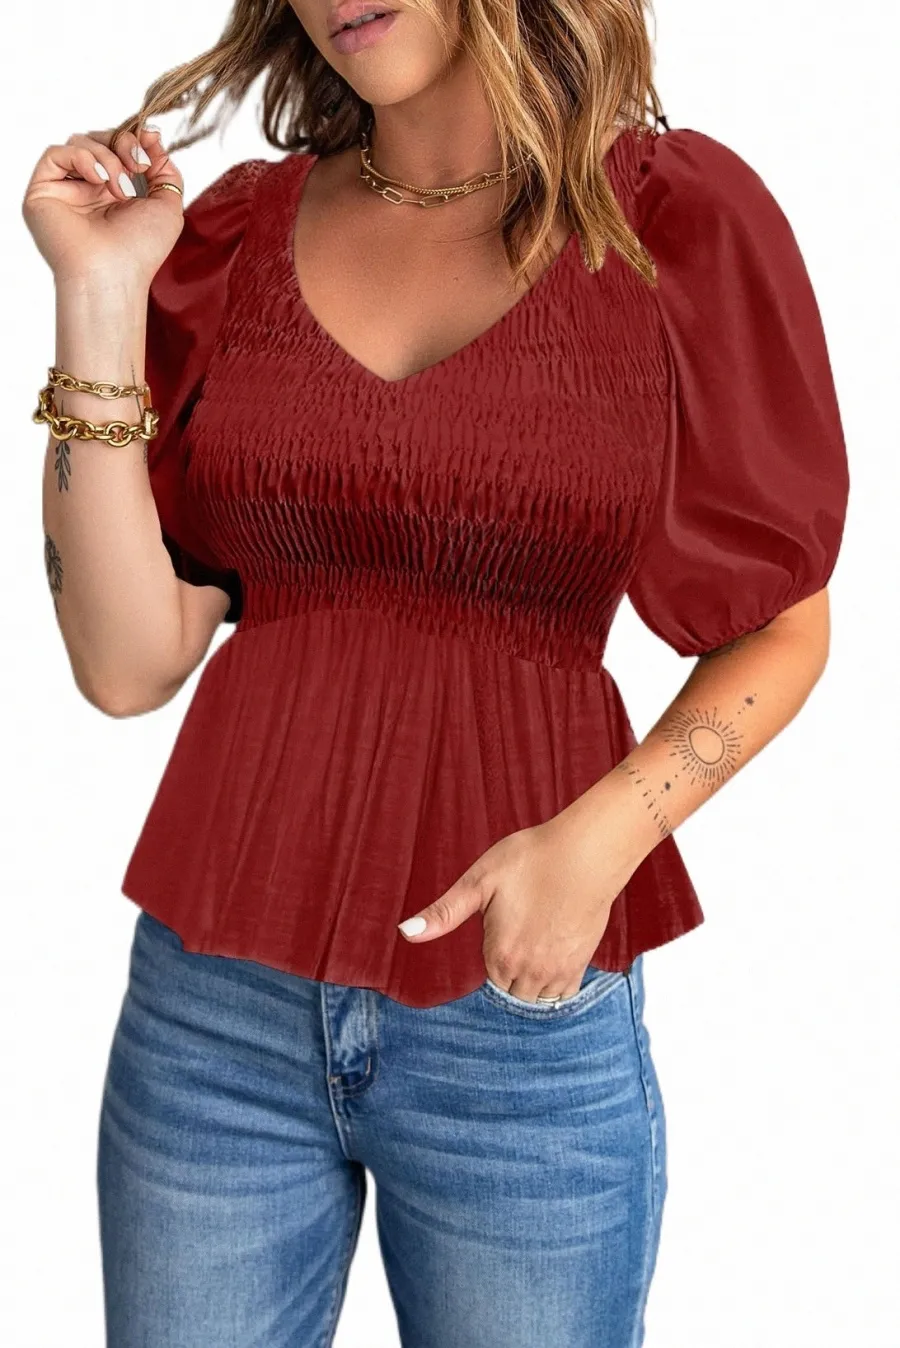 red Puff Sleeve Smocked Top 2023 Hot New 2023 Hot New Q7R2#